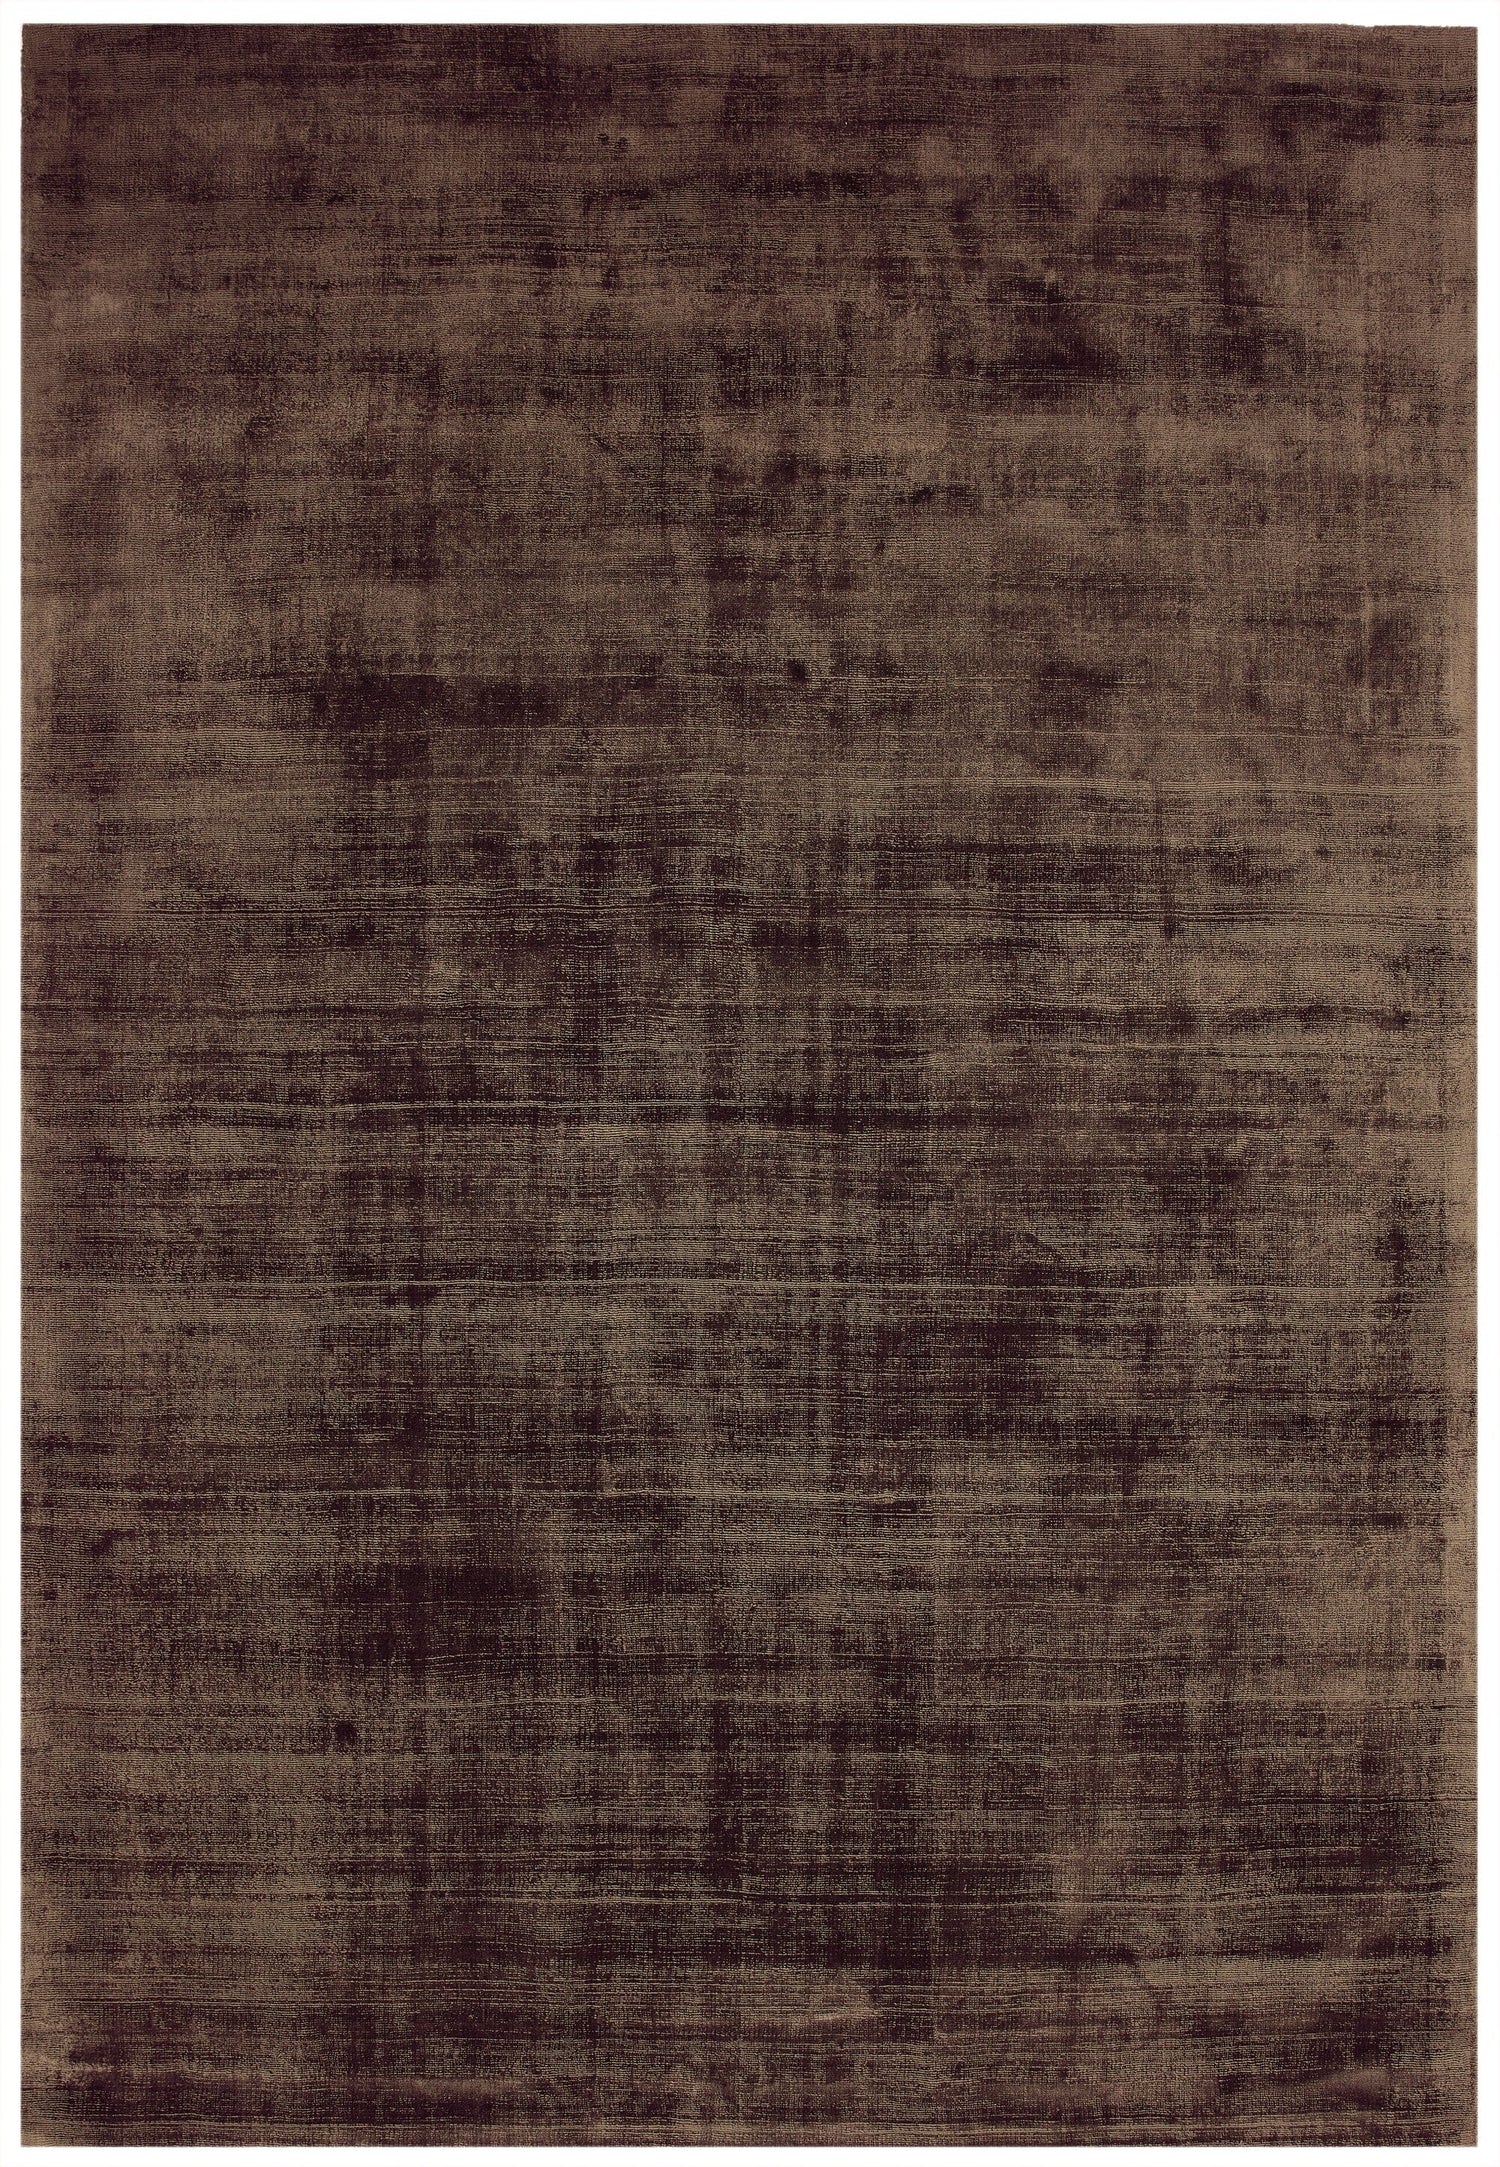  Asiatic Carpets-Asiatic Carpets Blade Hand Woven Rug Chocolate - 240 x 340cm-Brown 269 